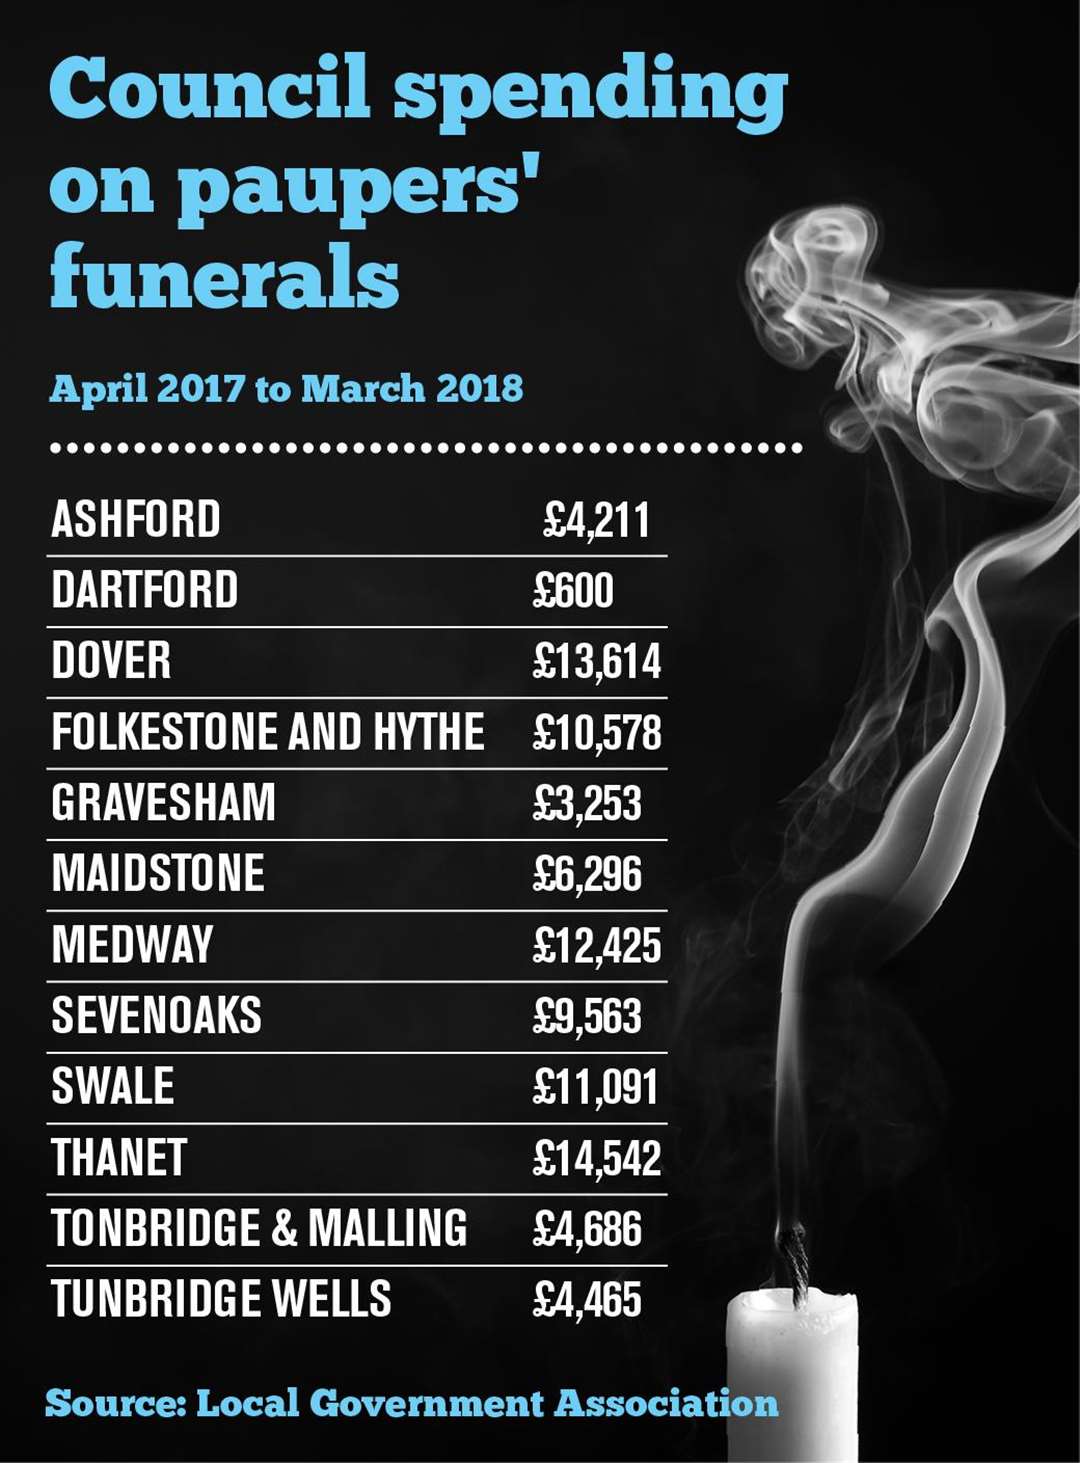 Almost £100,000 has been spent by council's in Kent on paupers' funerals